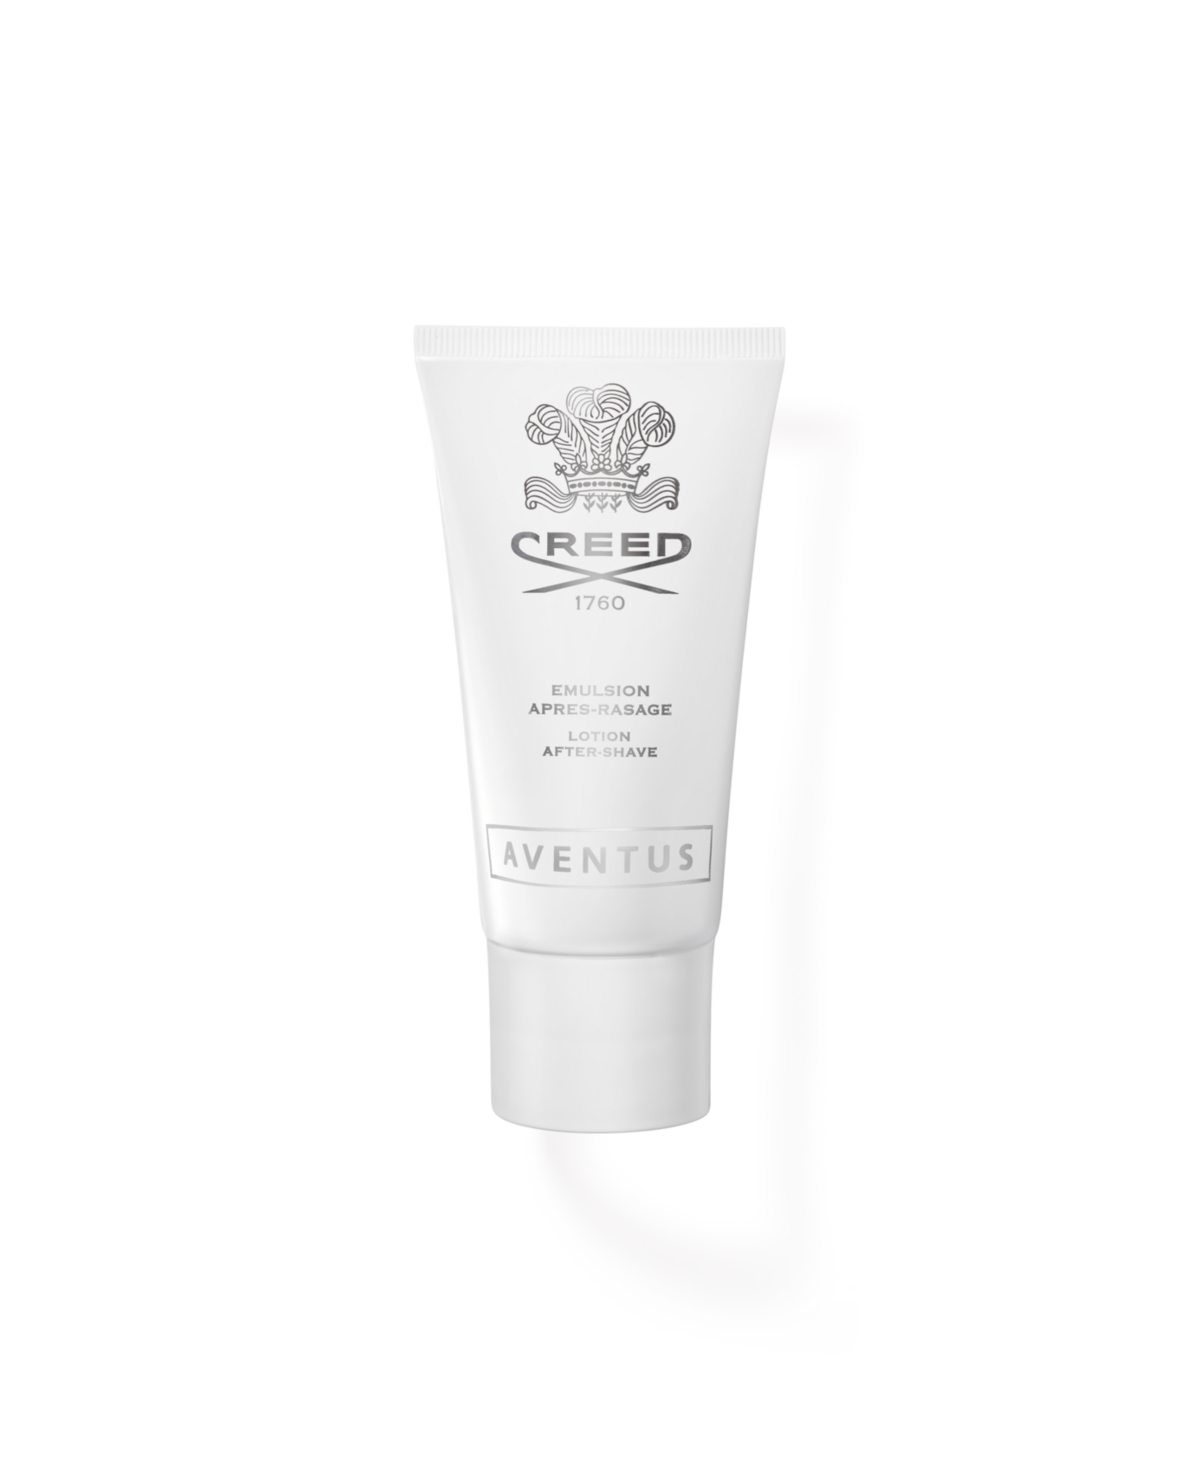 Creed Aventus After Shave Balm, 2.5 Oz.